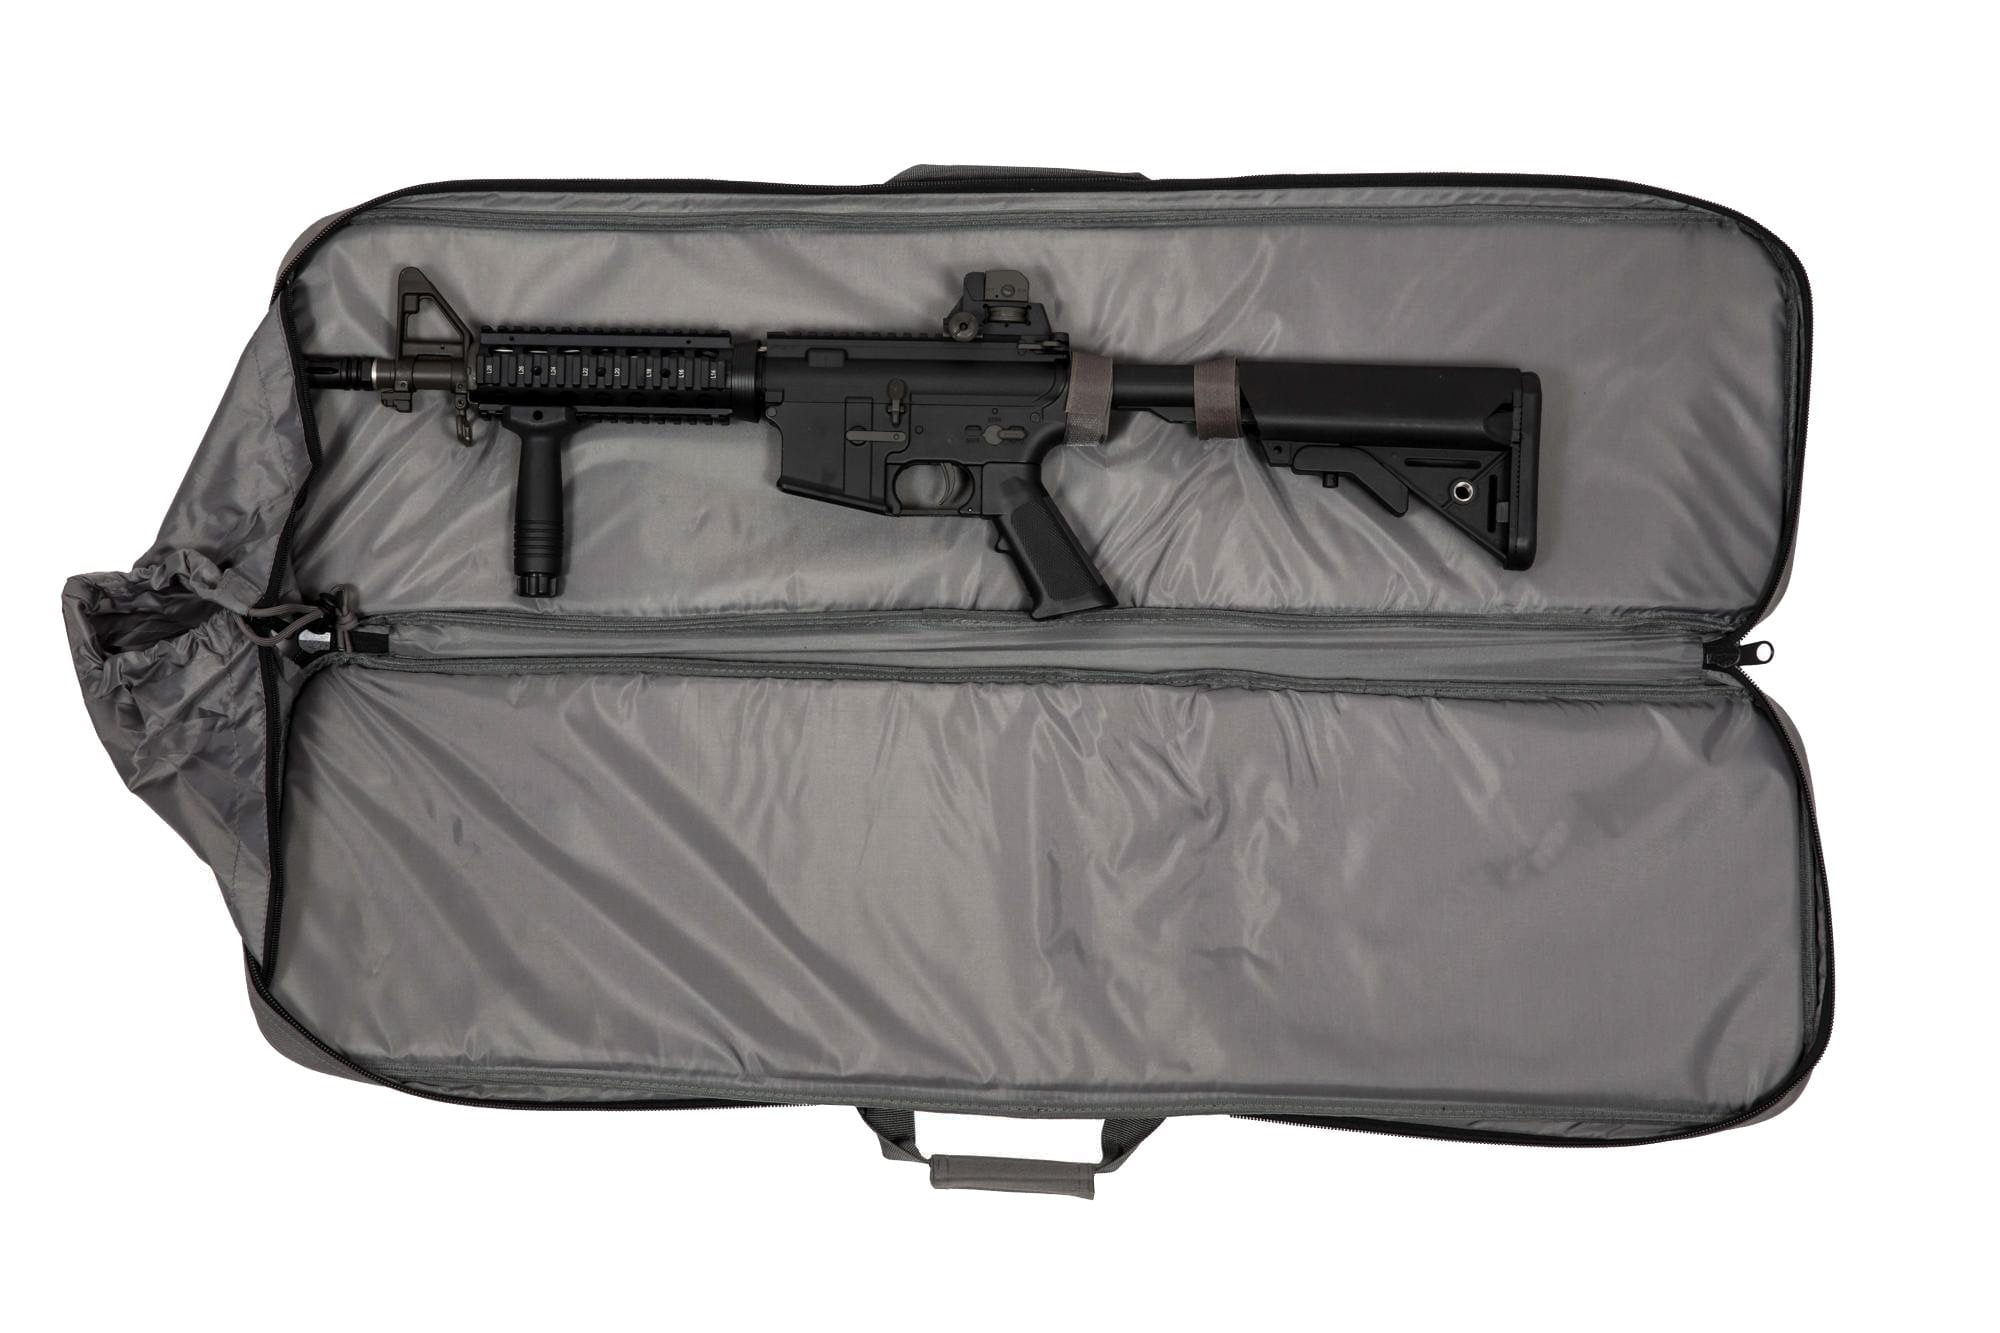 Gun Bag V1 - 98cm - Chaos Grey by Specna Arms on Airsoft Mania Europe